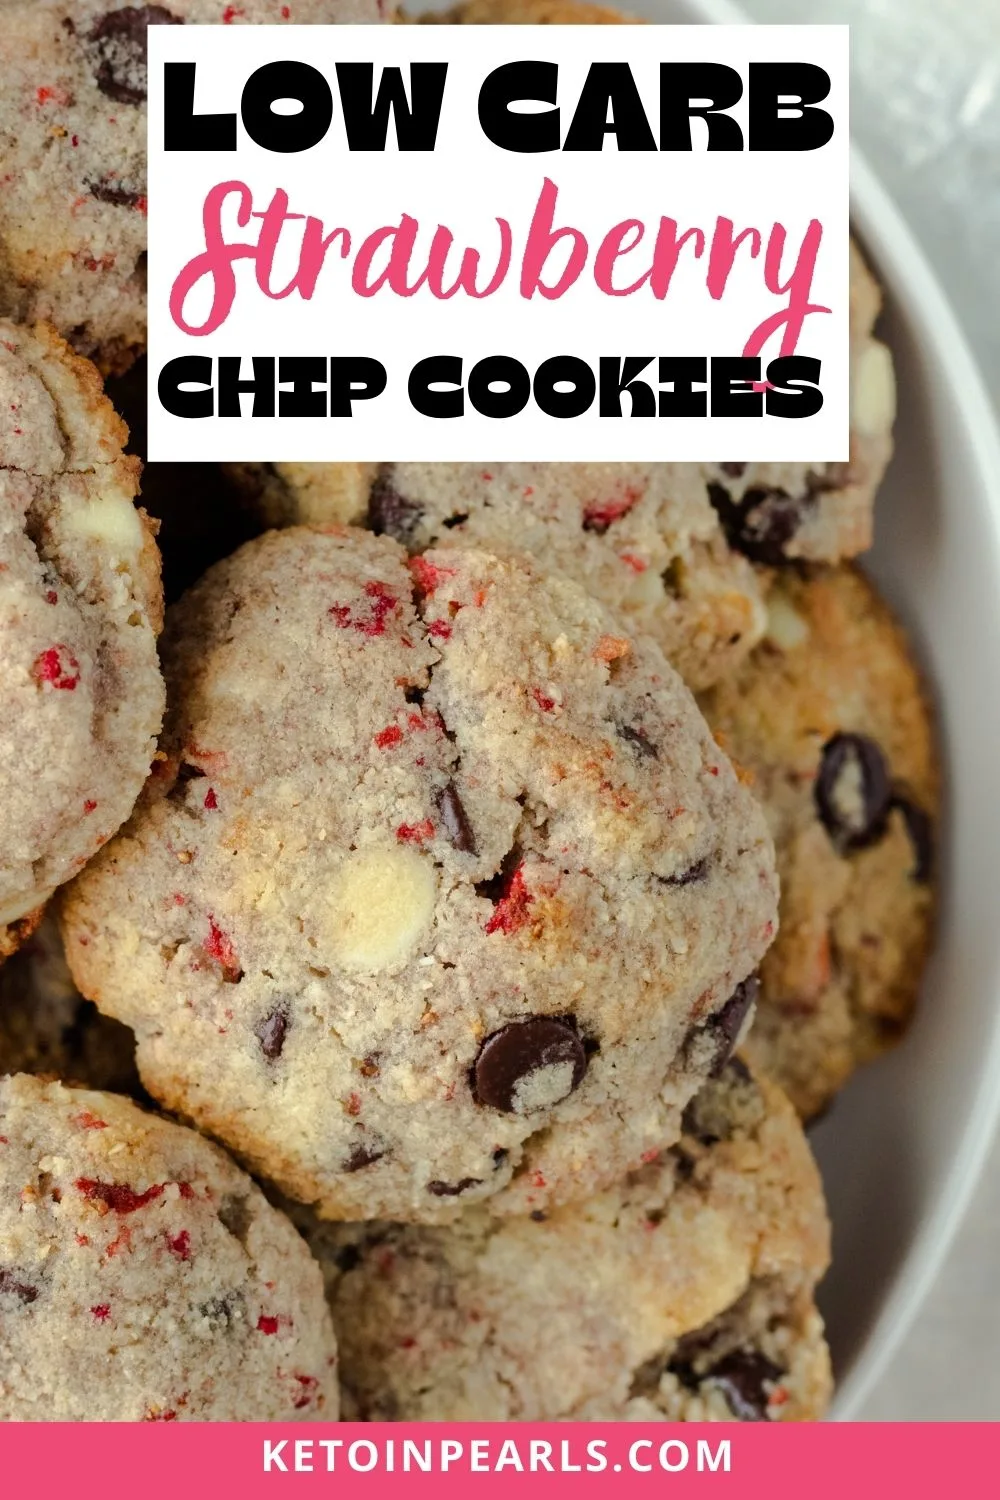 Sugar free dark chocolate, white chocolate, and bits of strawberries make these low carb chocolate chip cookies extra yummy! This keto cookie recipe can be made in one bowl too. Only 2.3 net carbs per cookie.